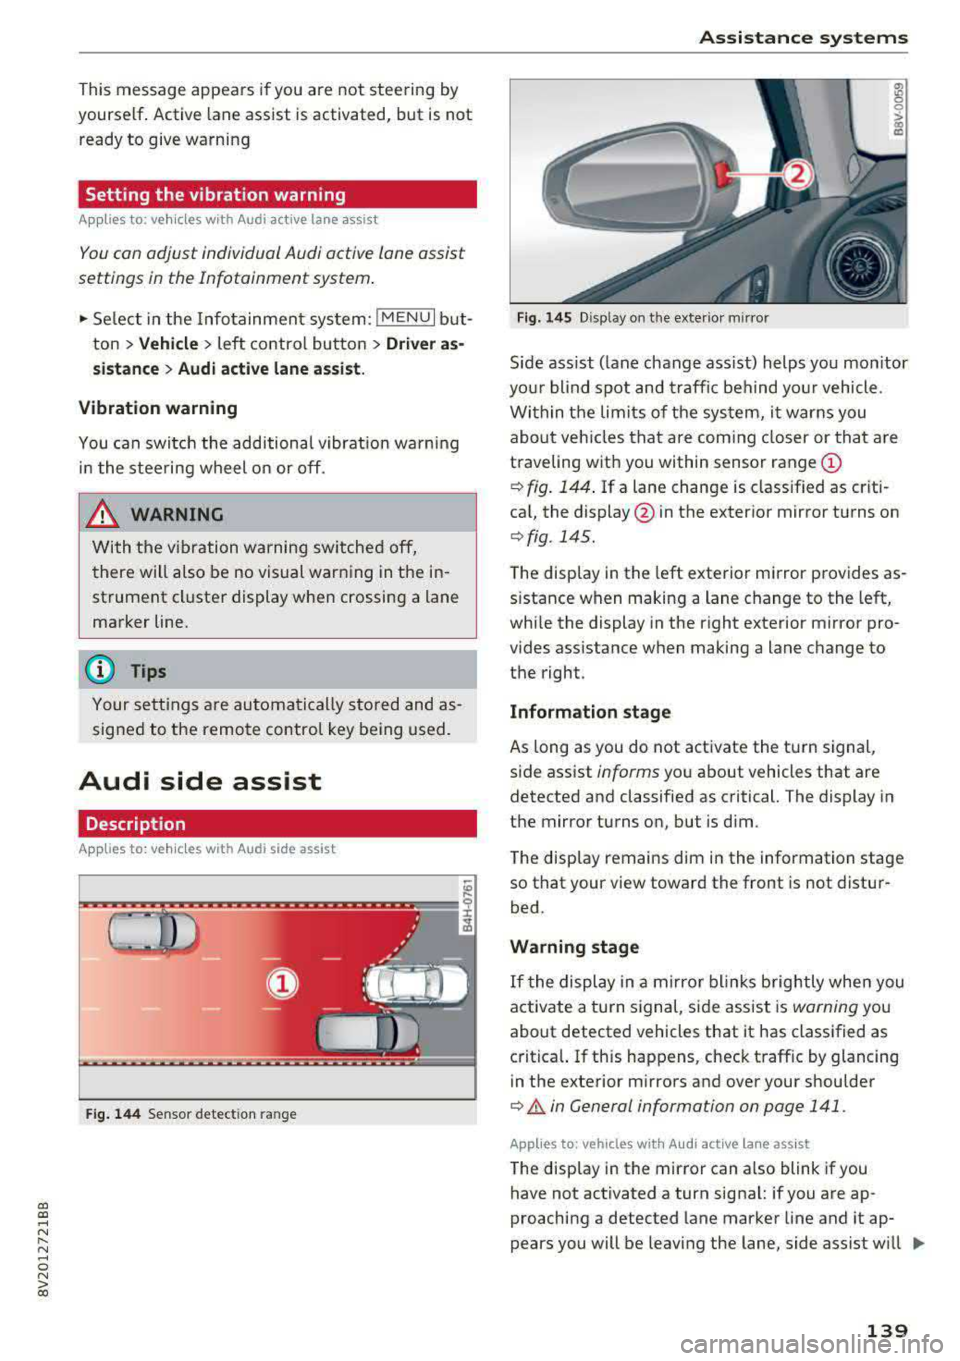 AUDI A3 SEDAN 2017  Owners Manual a,  a, ... N 
" N ..... 0 N > 00 
This  message  appears if you  are  not steering  by 
yourself . Active  lane  assist  is activated,  but  is not 
ready  to  give  warning 
Setting  the  vibration  